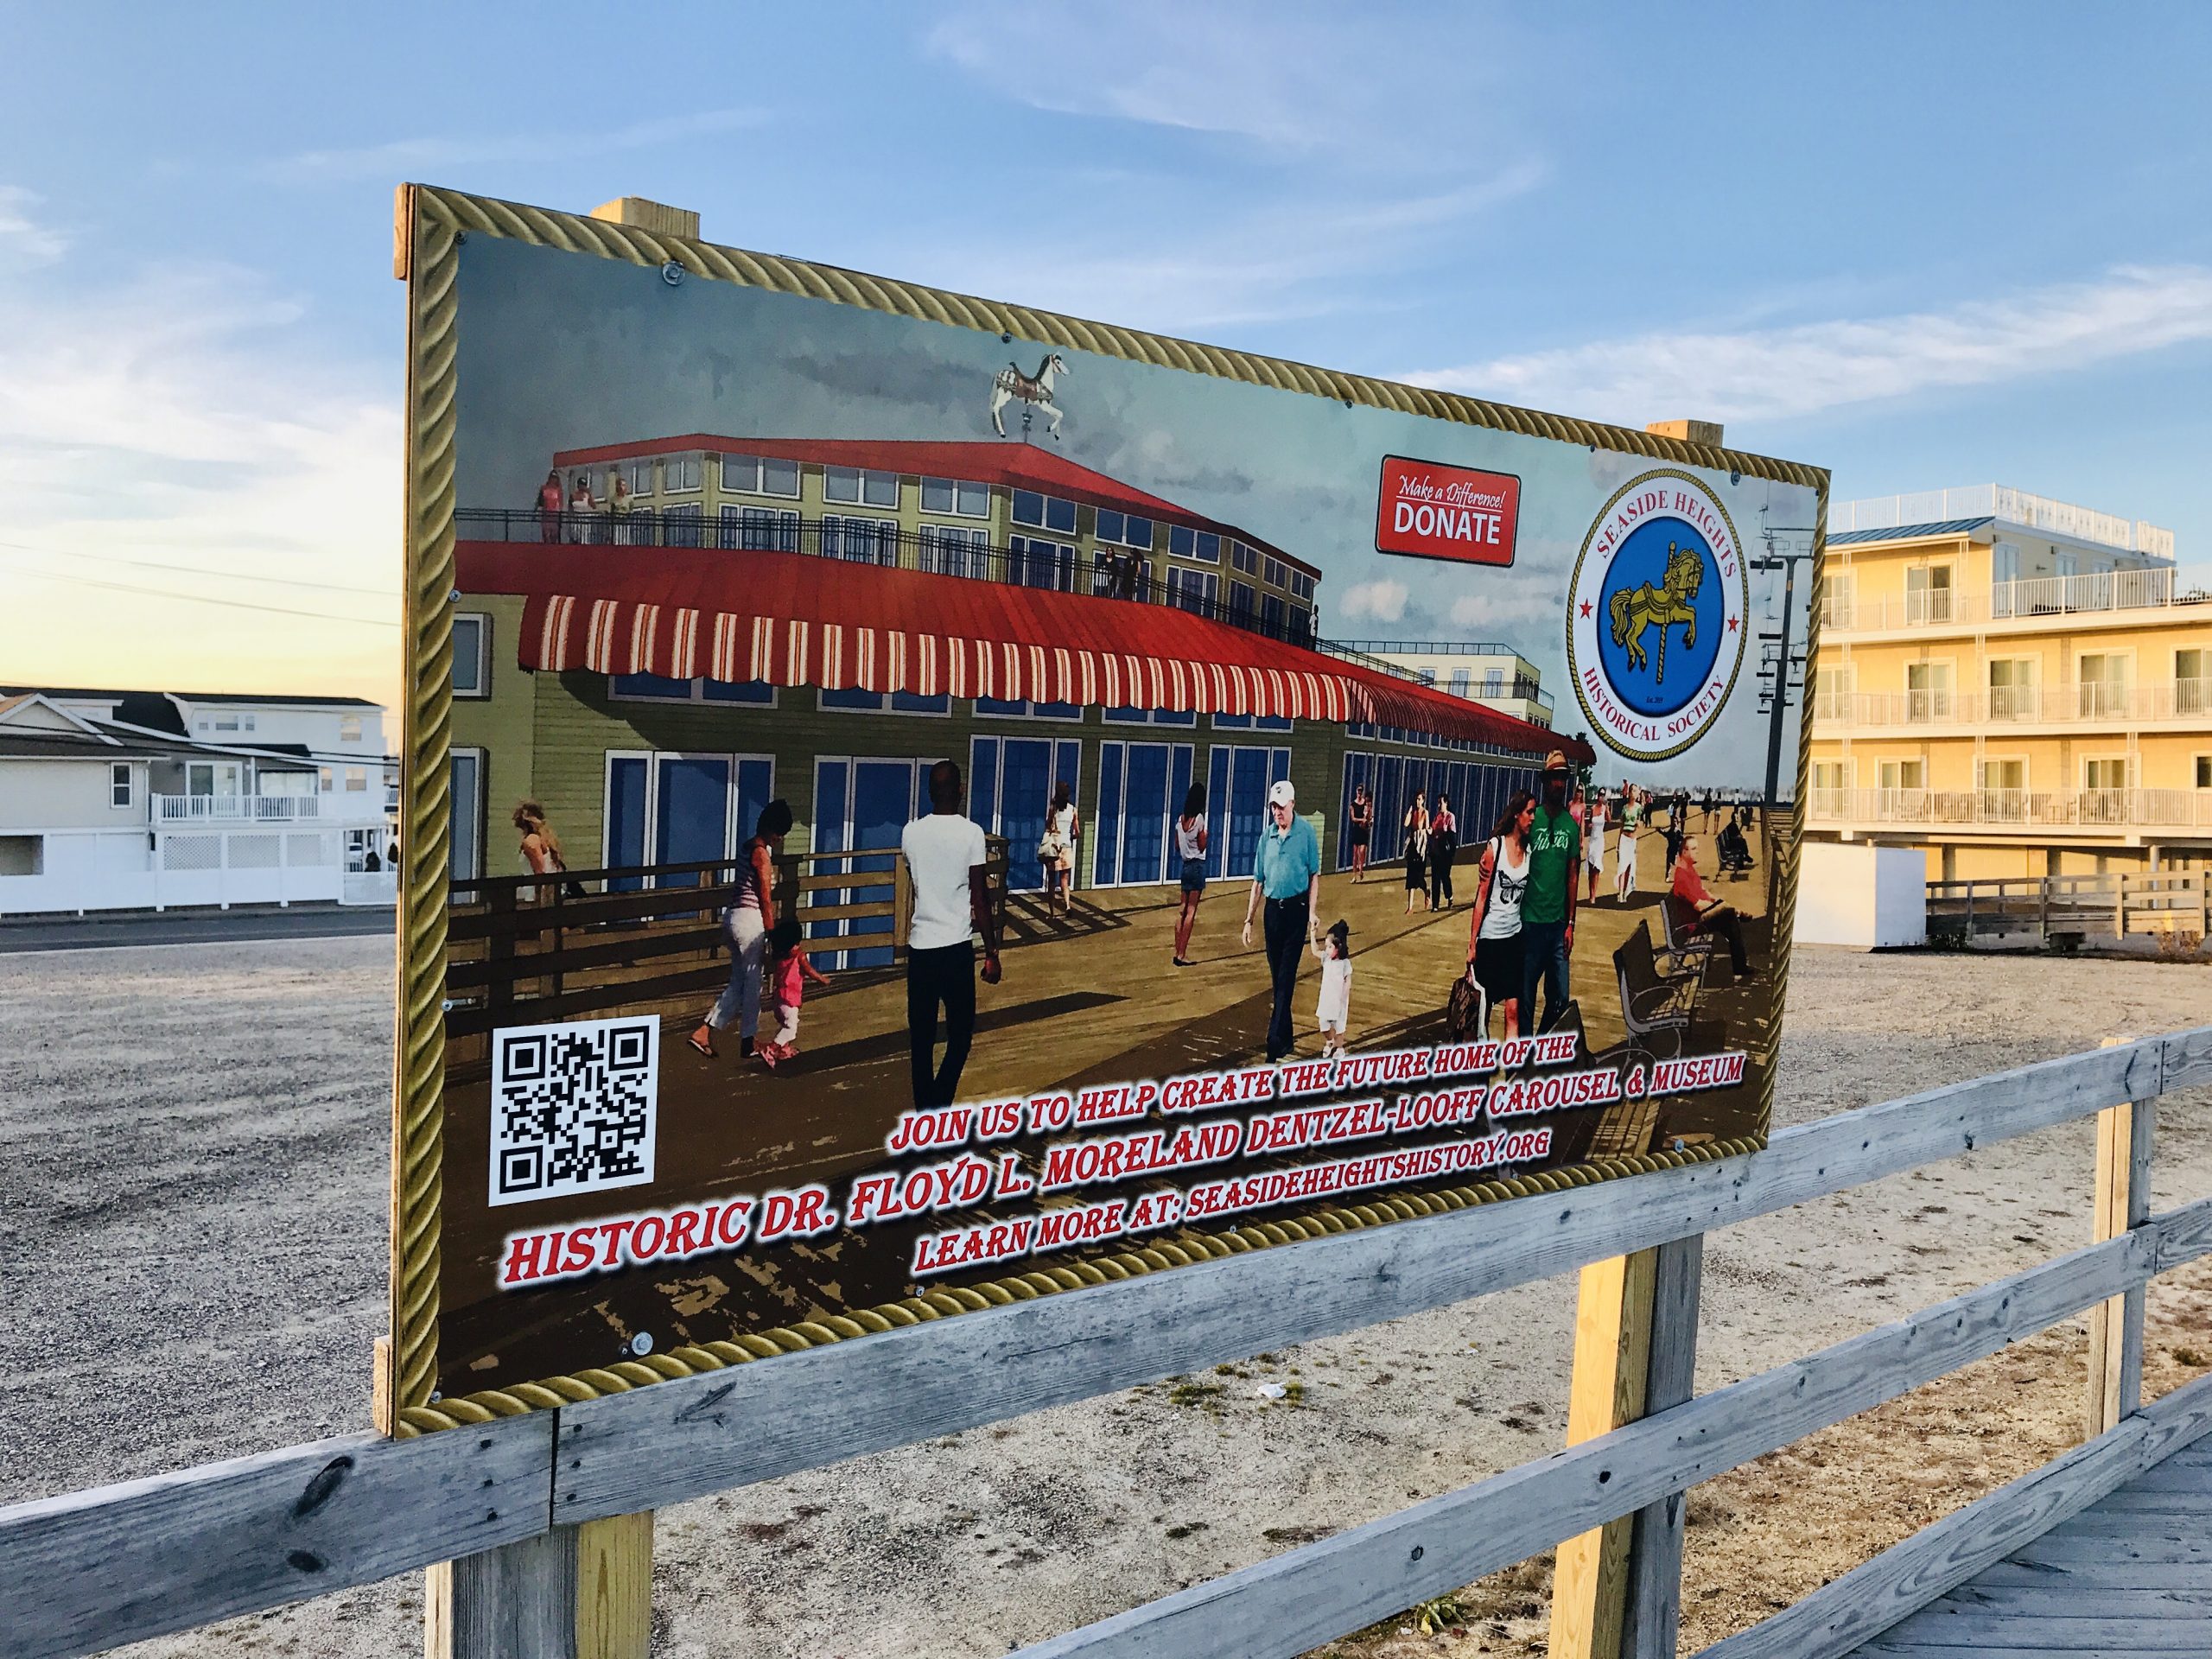 The future home of the Seaside Heights boardwalk museum and carousel at Carteret Avenue. (Photo: Daniel Nee)